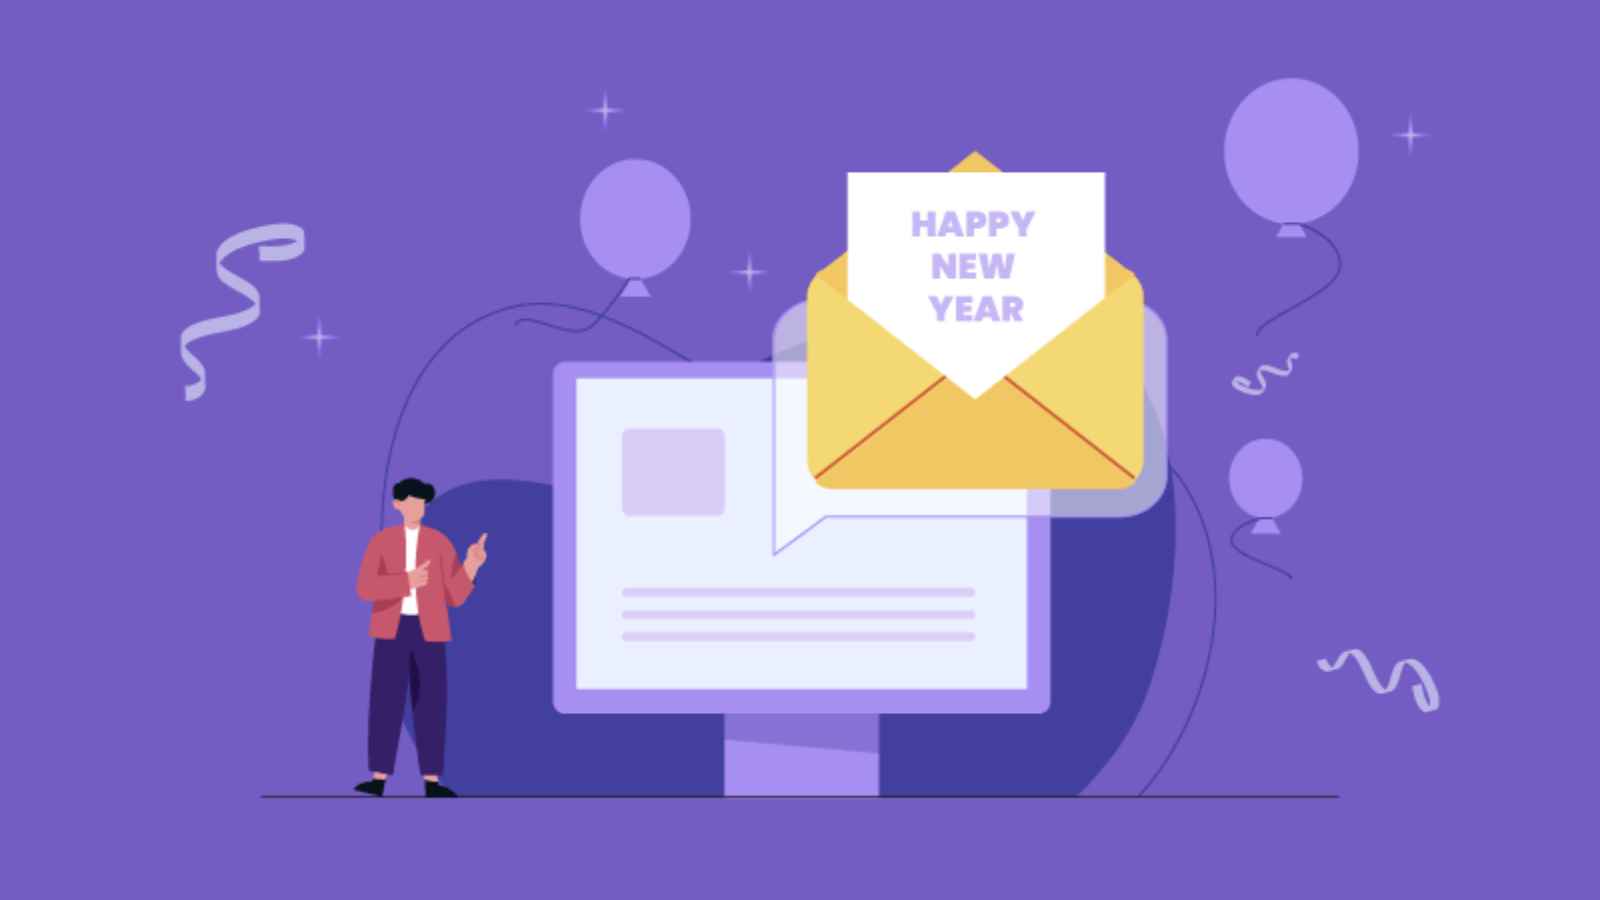 Happy New Year 2023 Wishes for Employees & Coworkers – Boomf